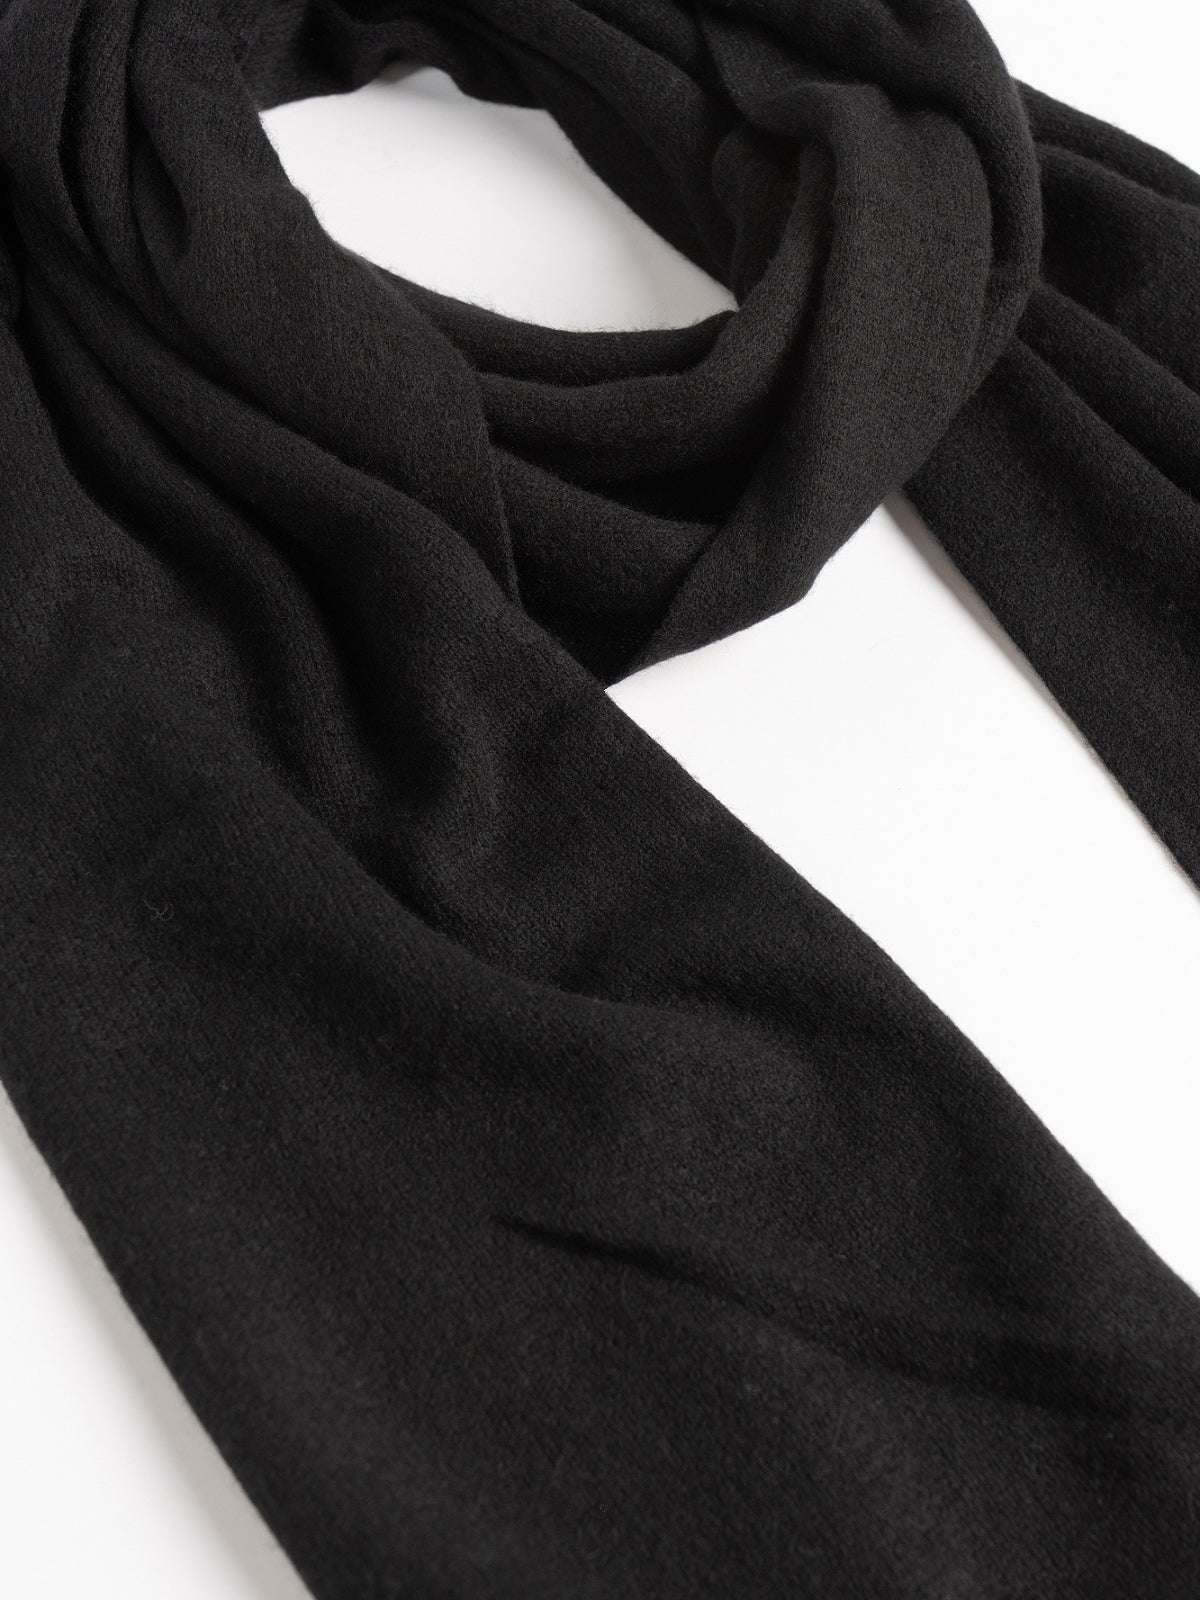 Two Blind Brothers - Gift Cashmere Travel Wrap Black